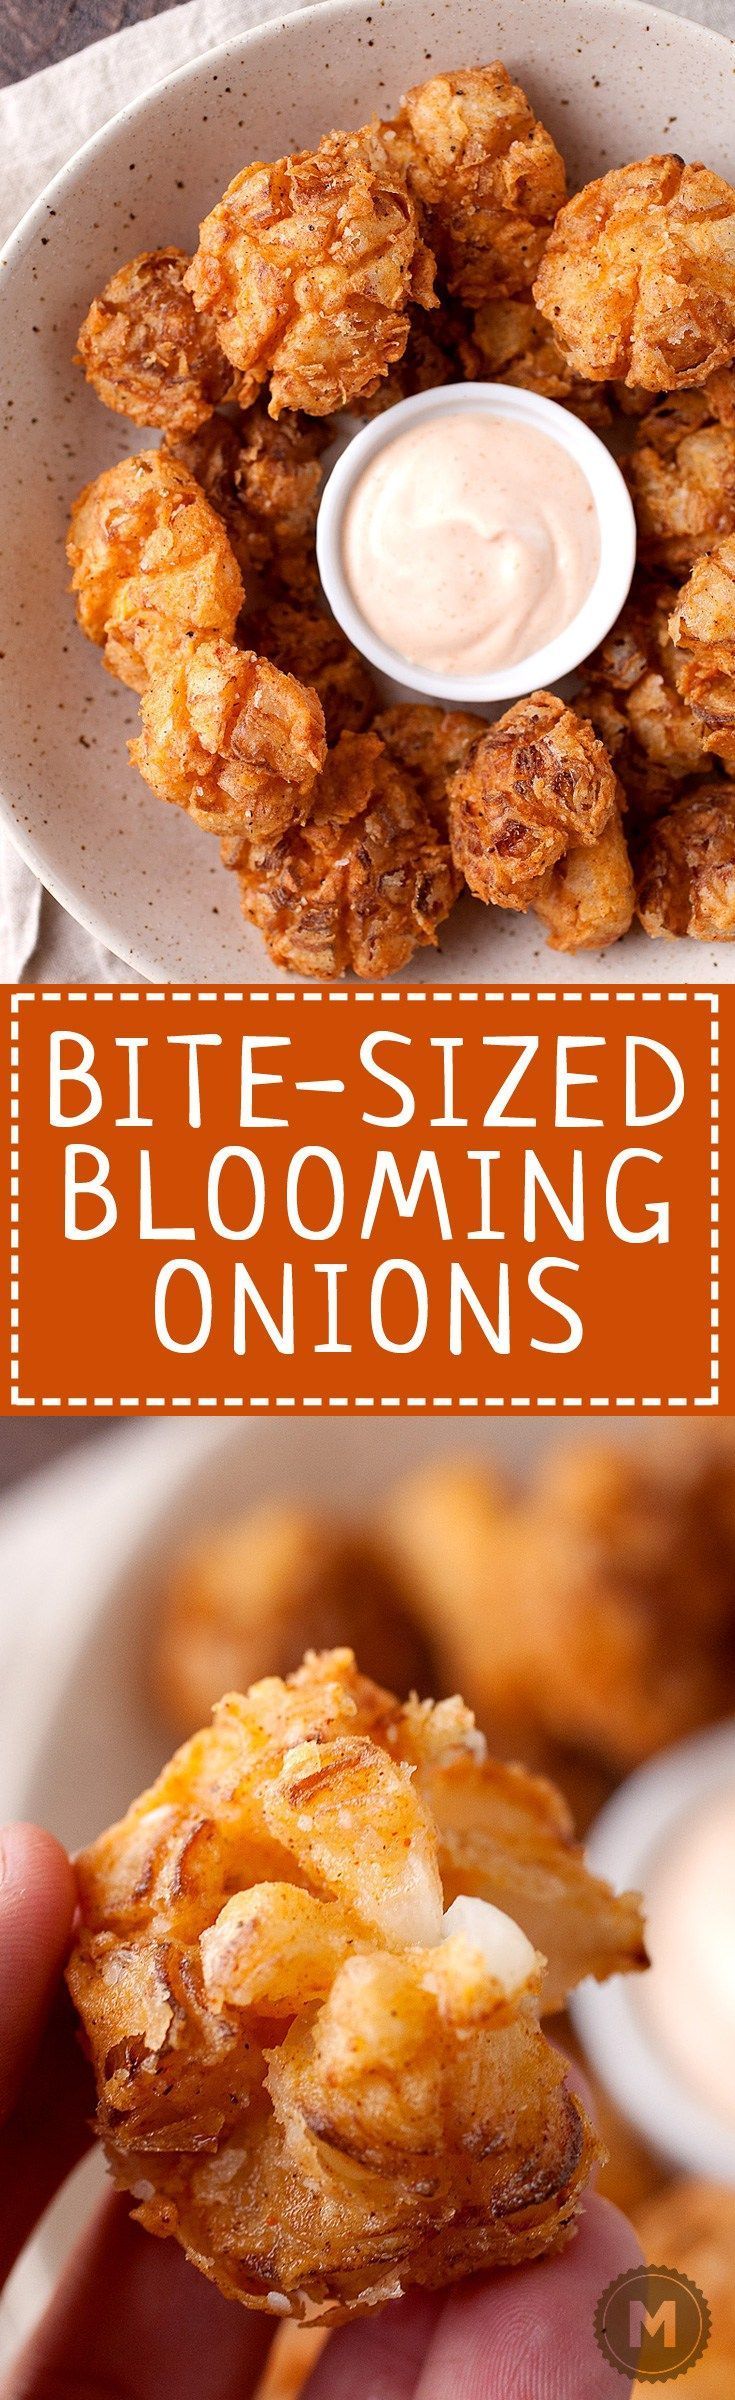 Bited Sized Blooming Onions: The perfect bite-sized version of the popular fried onion appetizer! Easy to share and easy to eat!